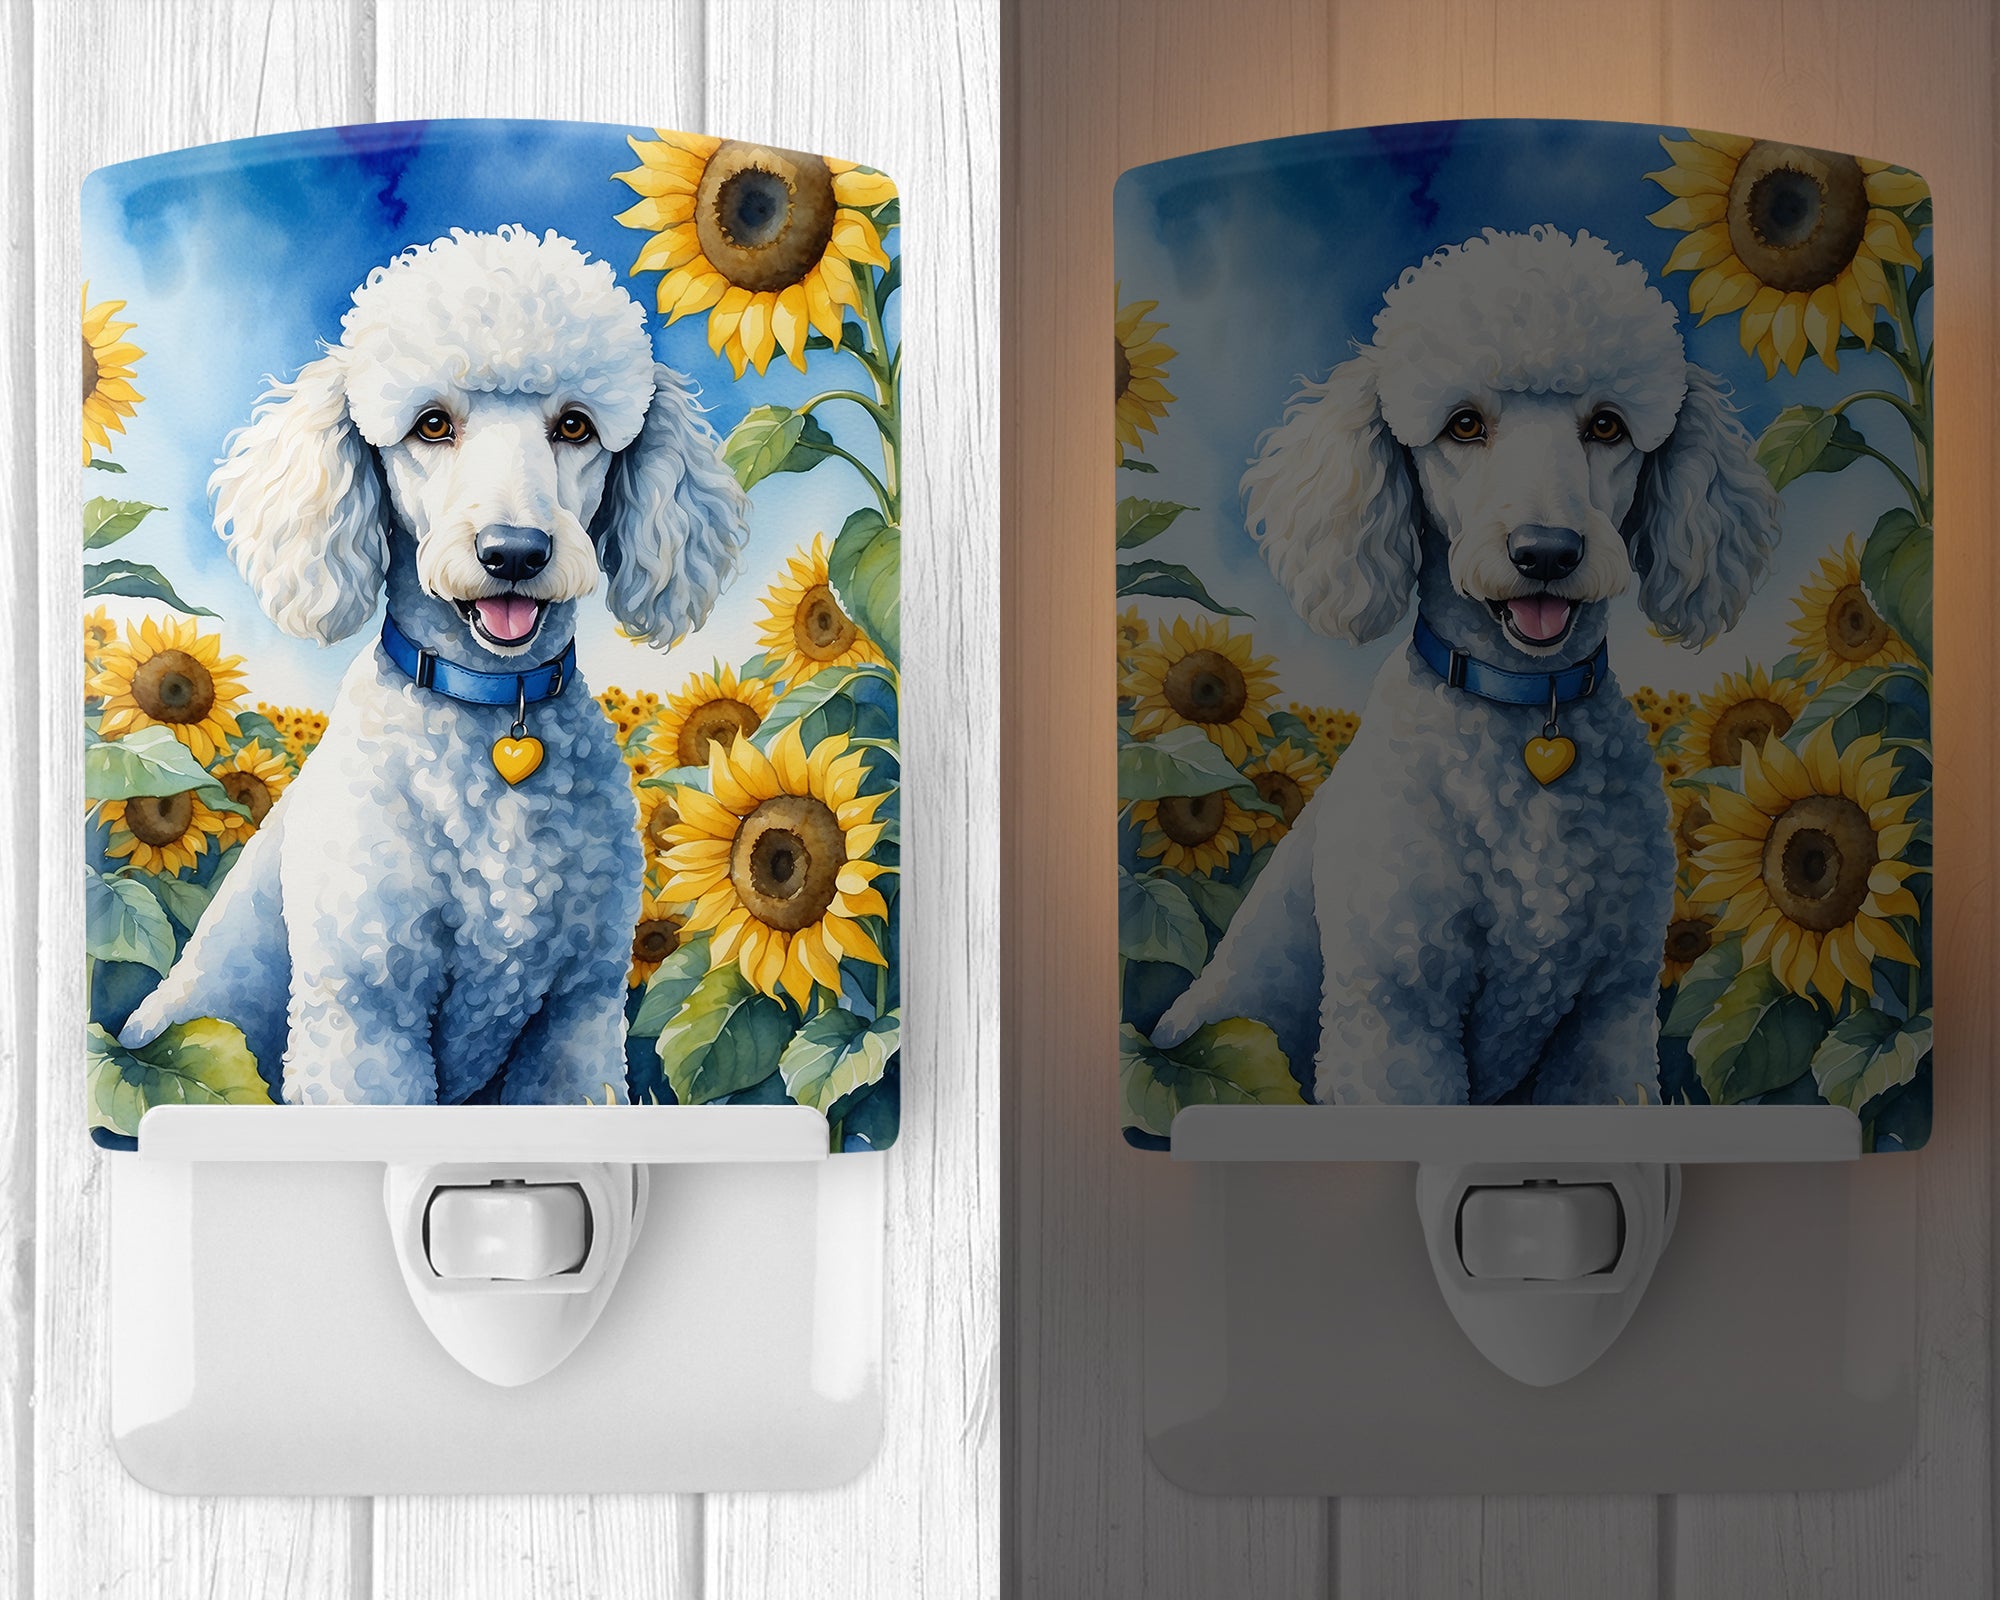 White Poodle in Sunflowers Ceramic Night Light